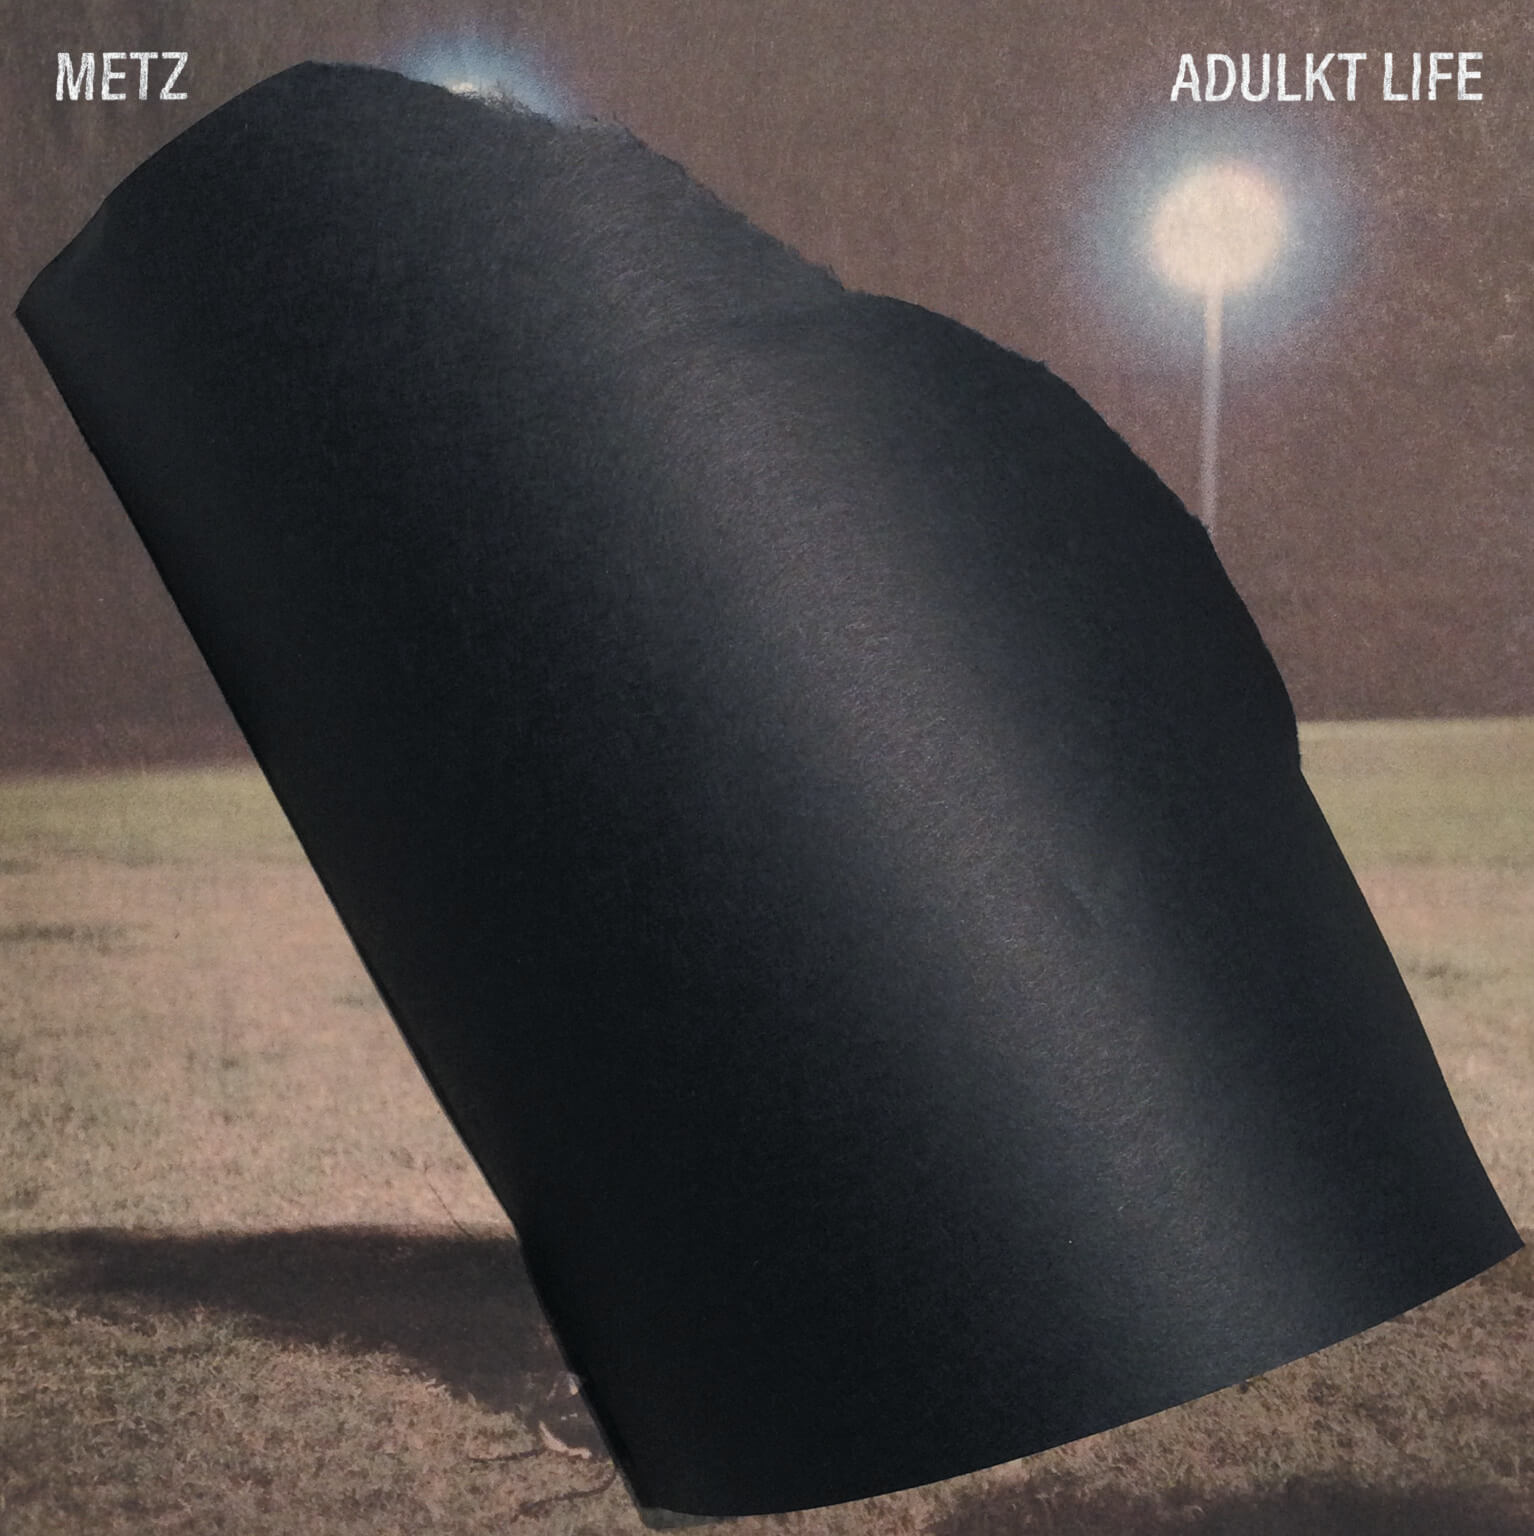 Metz and Adulkt Life, have announced a split 7”, which will drop on March 4th via What’s Your Rupture? (Savoy Motel, Parquet Courts)